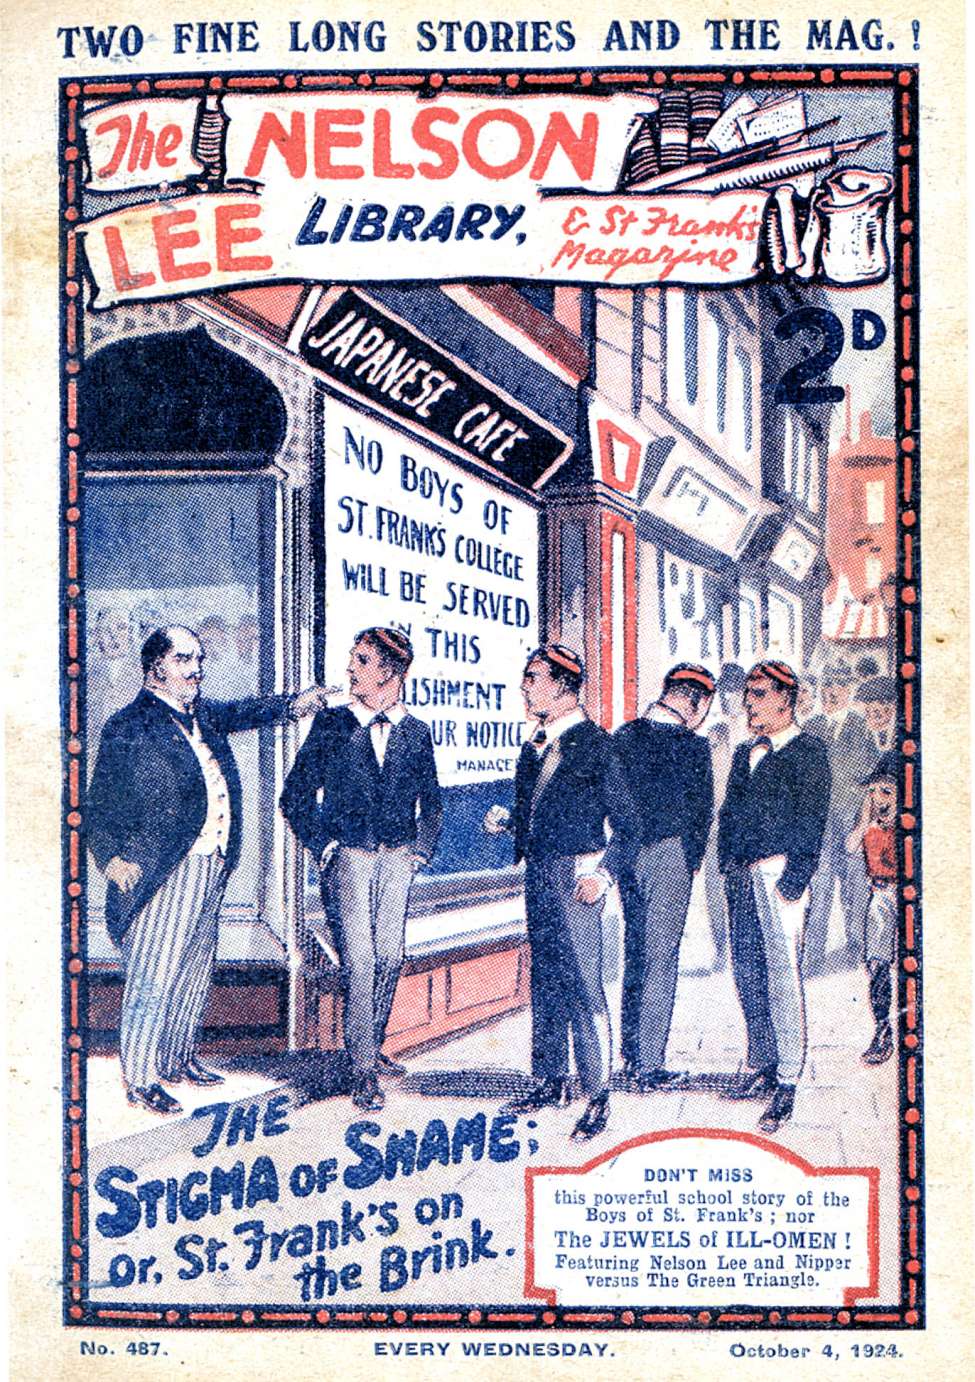 Book Cover For Nelson Lee Library s1 487 - The Stigma of Shame